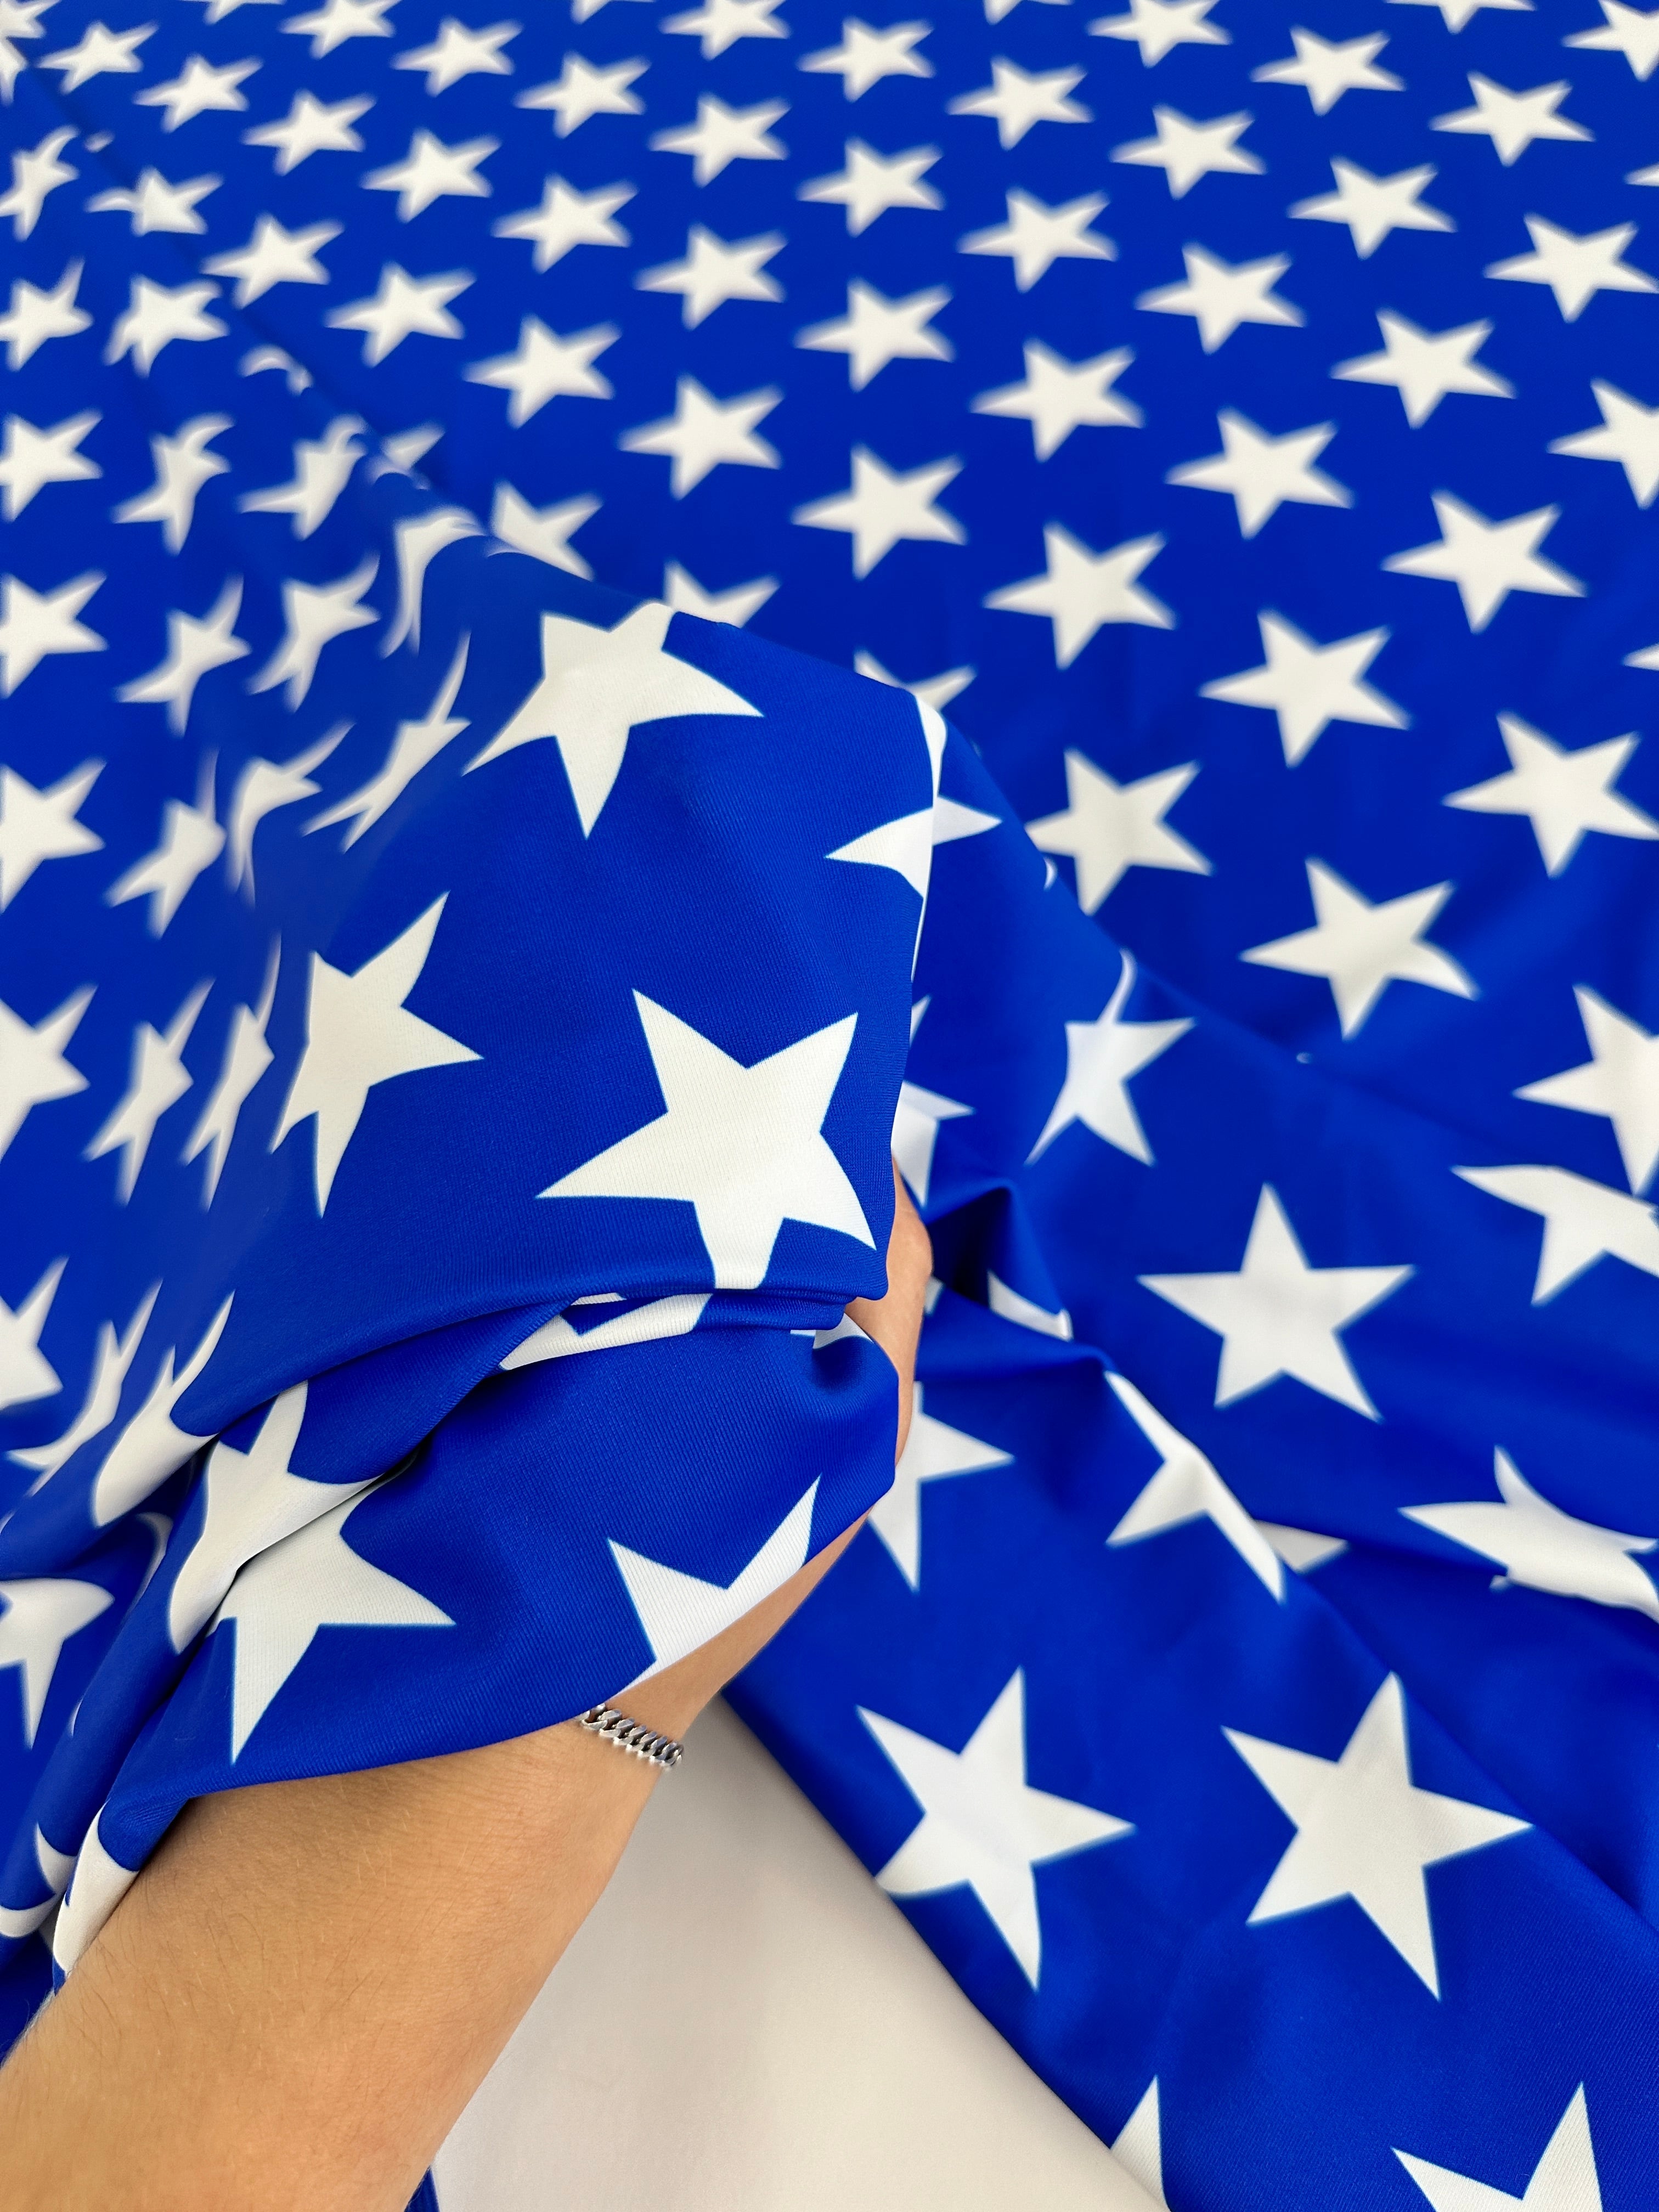 Royal Blue Star Print Nylon Spandex, online textile store, sewing, fabric store, sewing store, cheap fabric store, kiki textiles